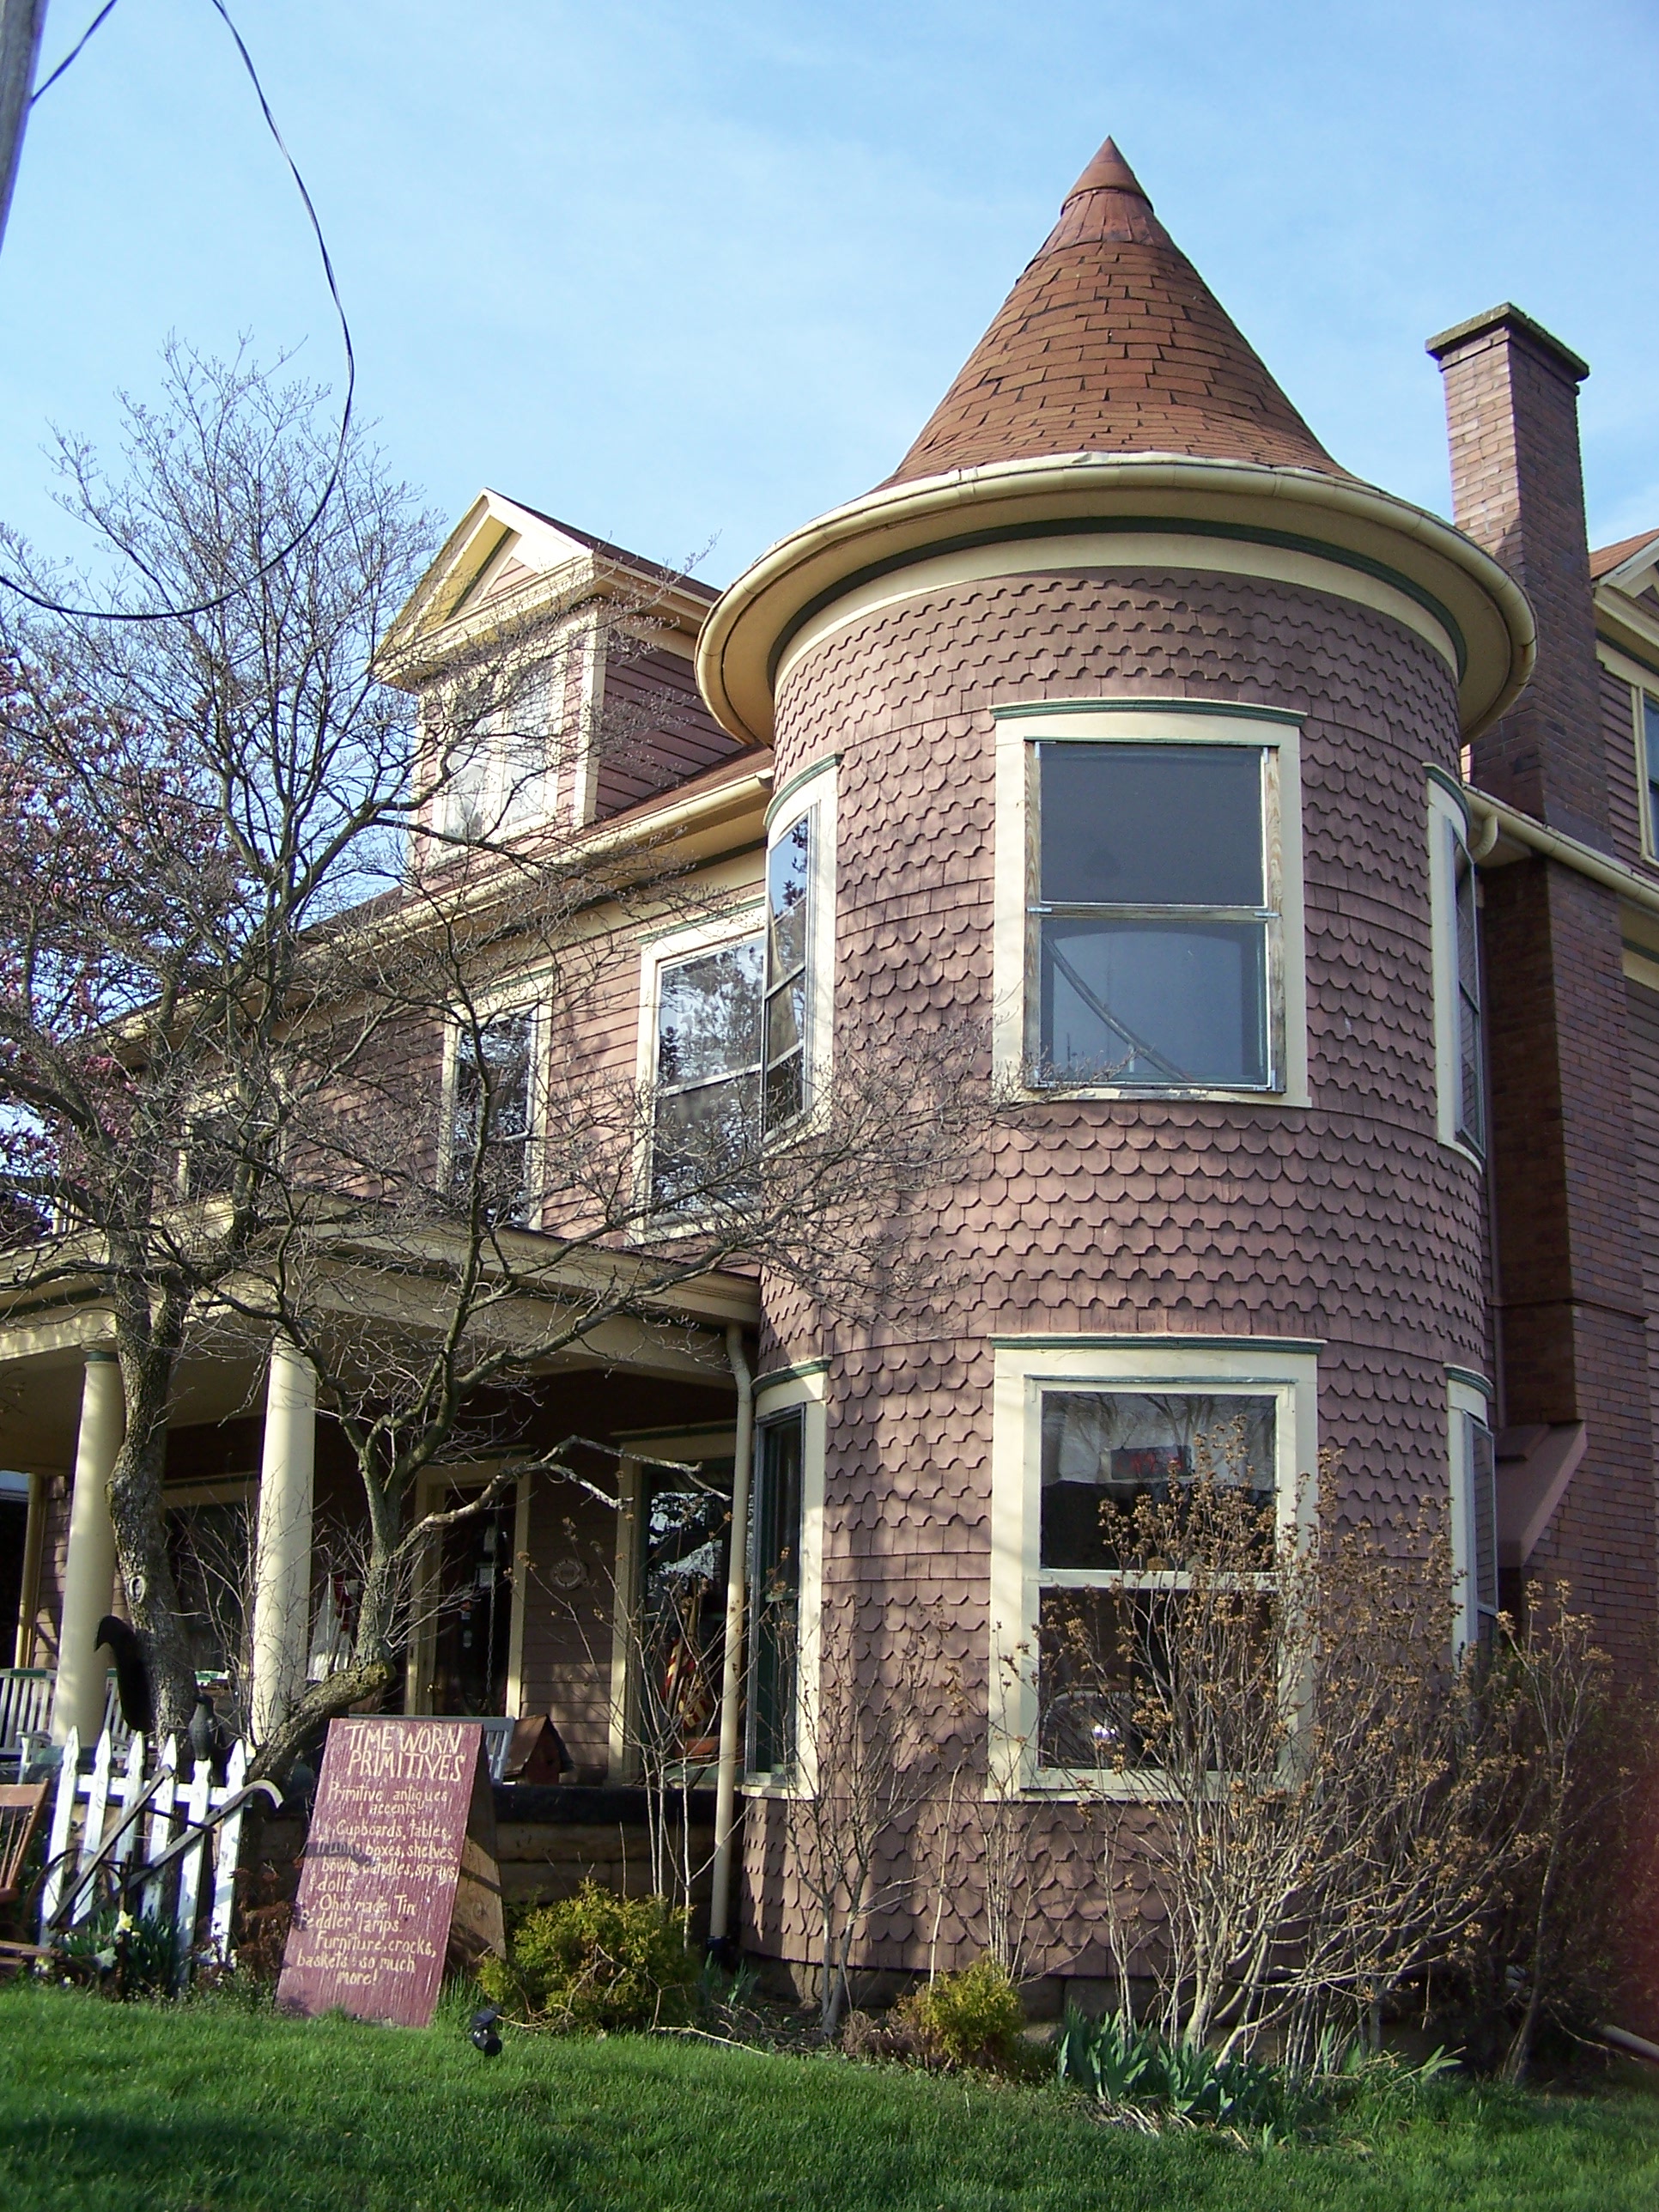 photo of the William Blank House with its turret